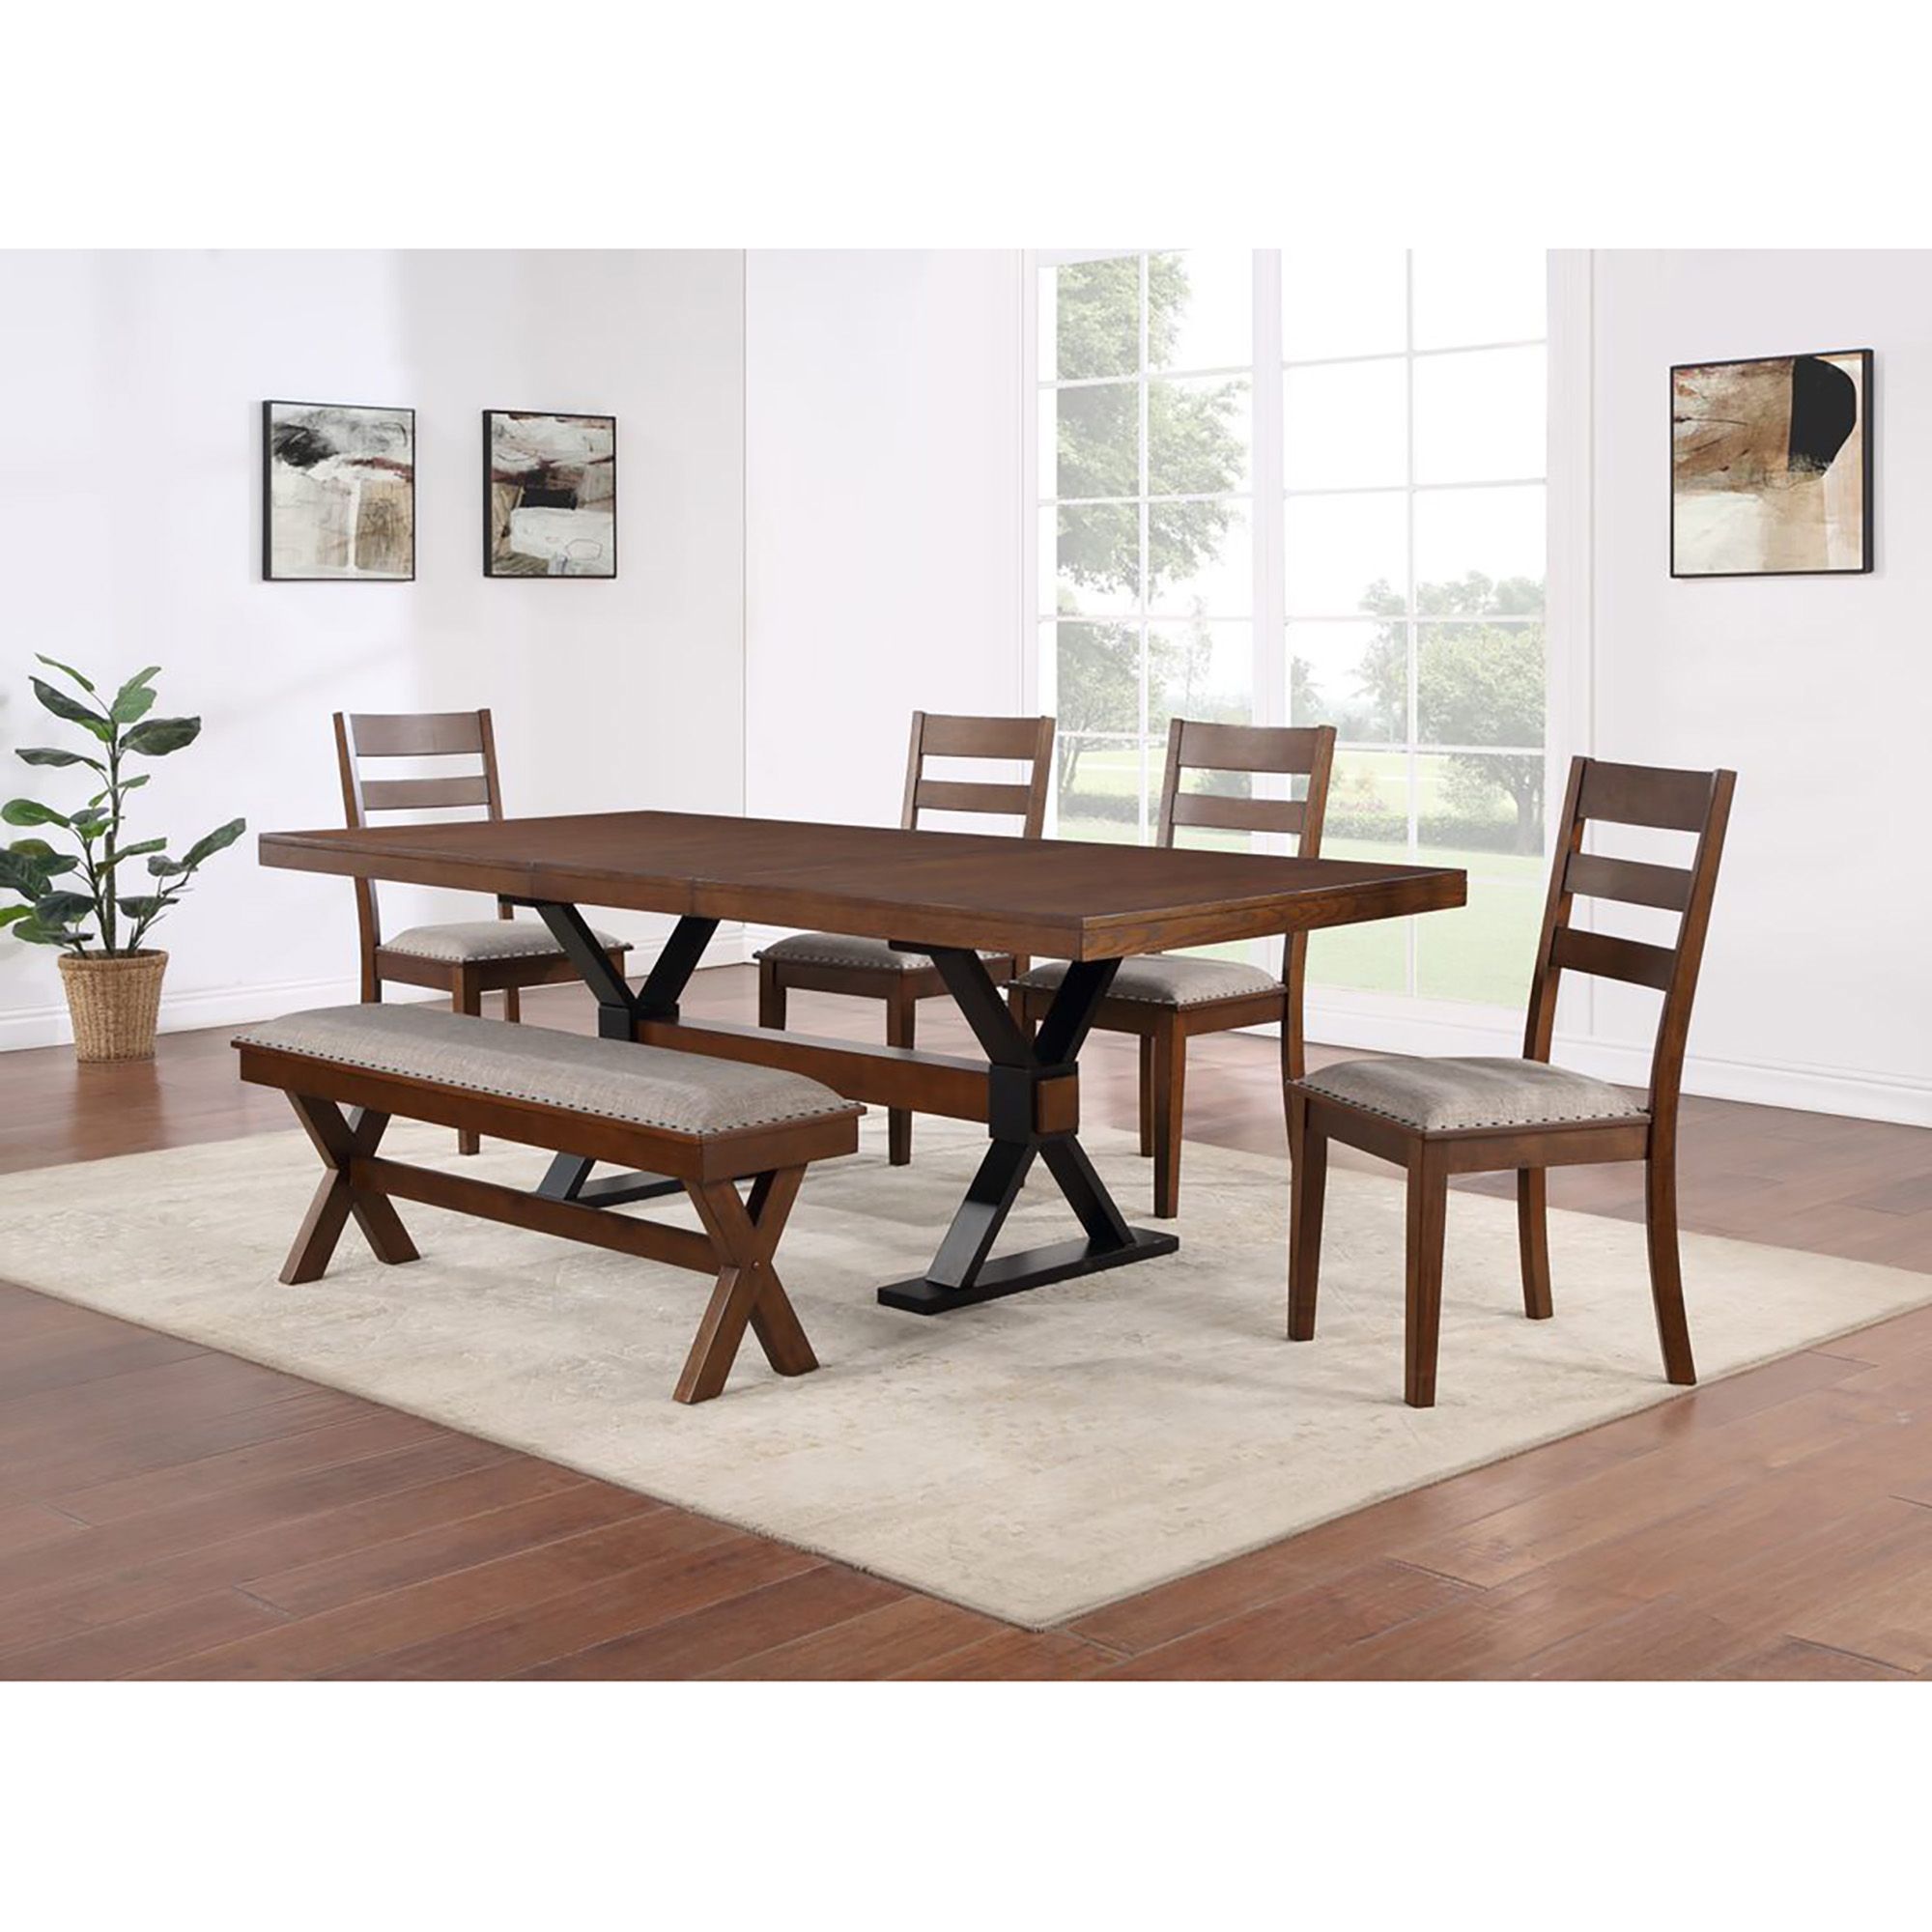 Home to Office 6 Piece Dexter Dining Set